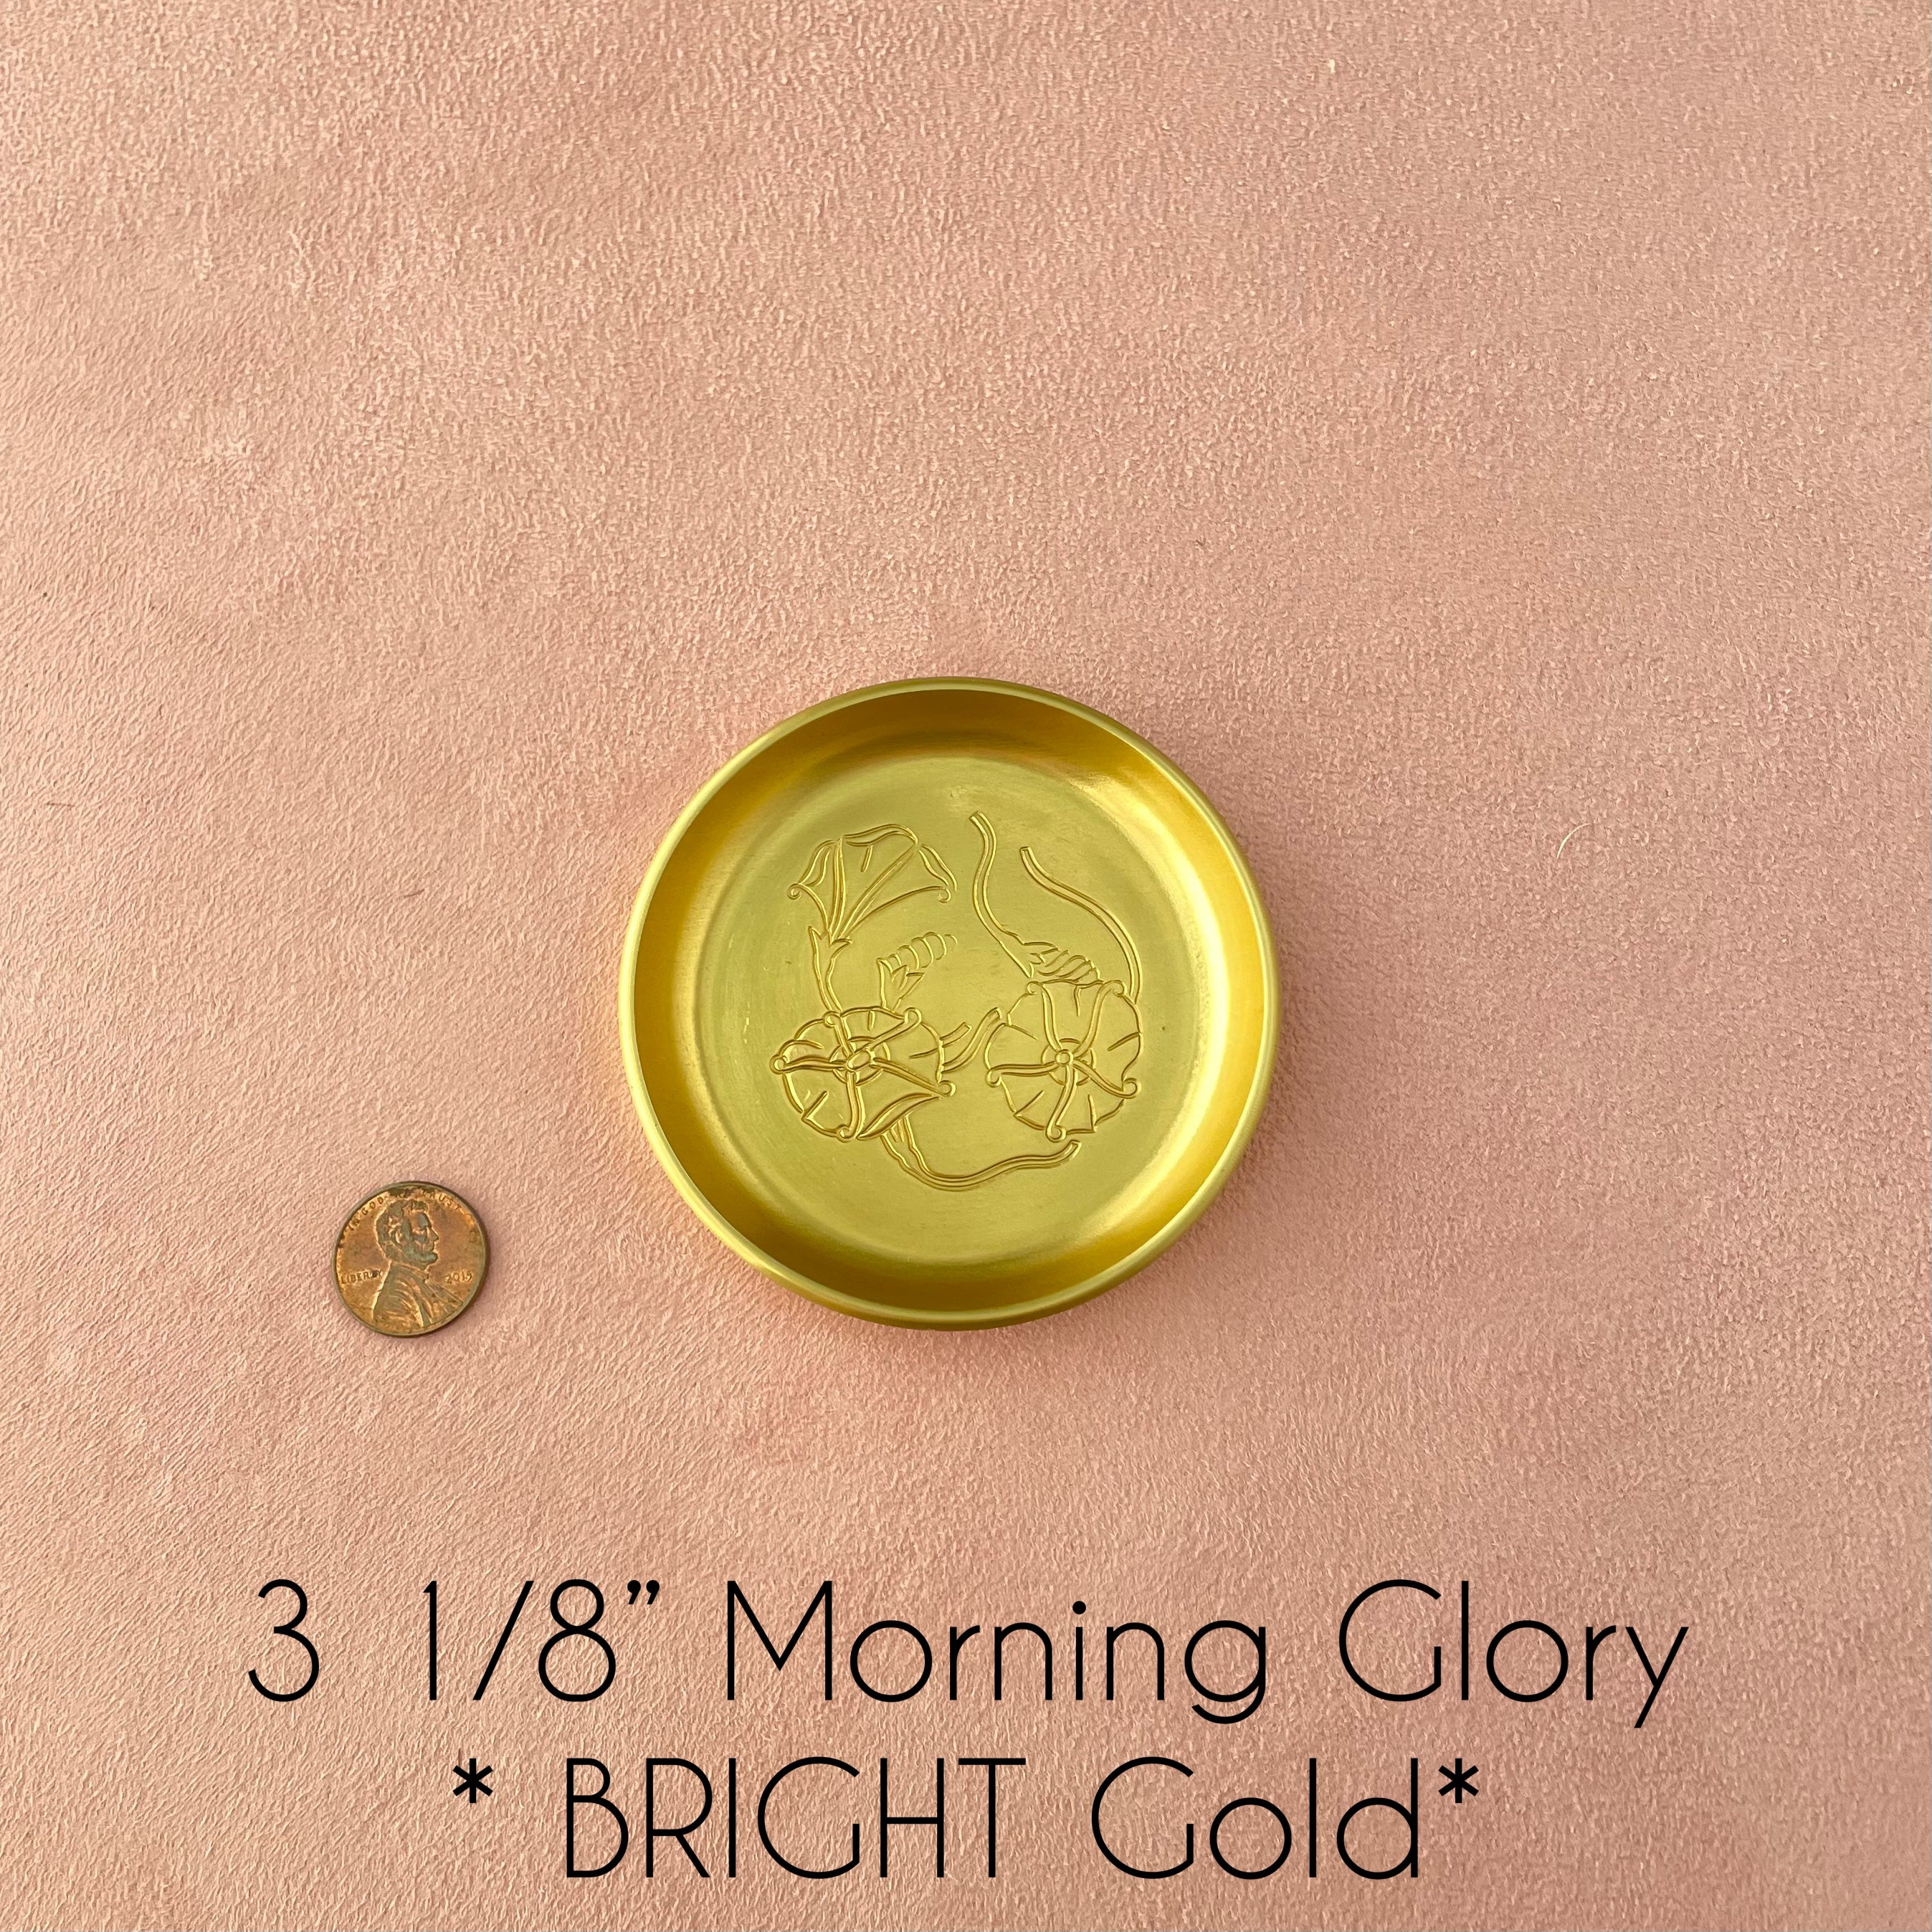 3 1/8 inch morning glory bright gold dish, penny beside for size reference - Wedding Flat lay props from Champagne & GRIT